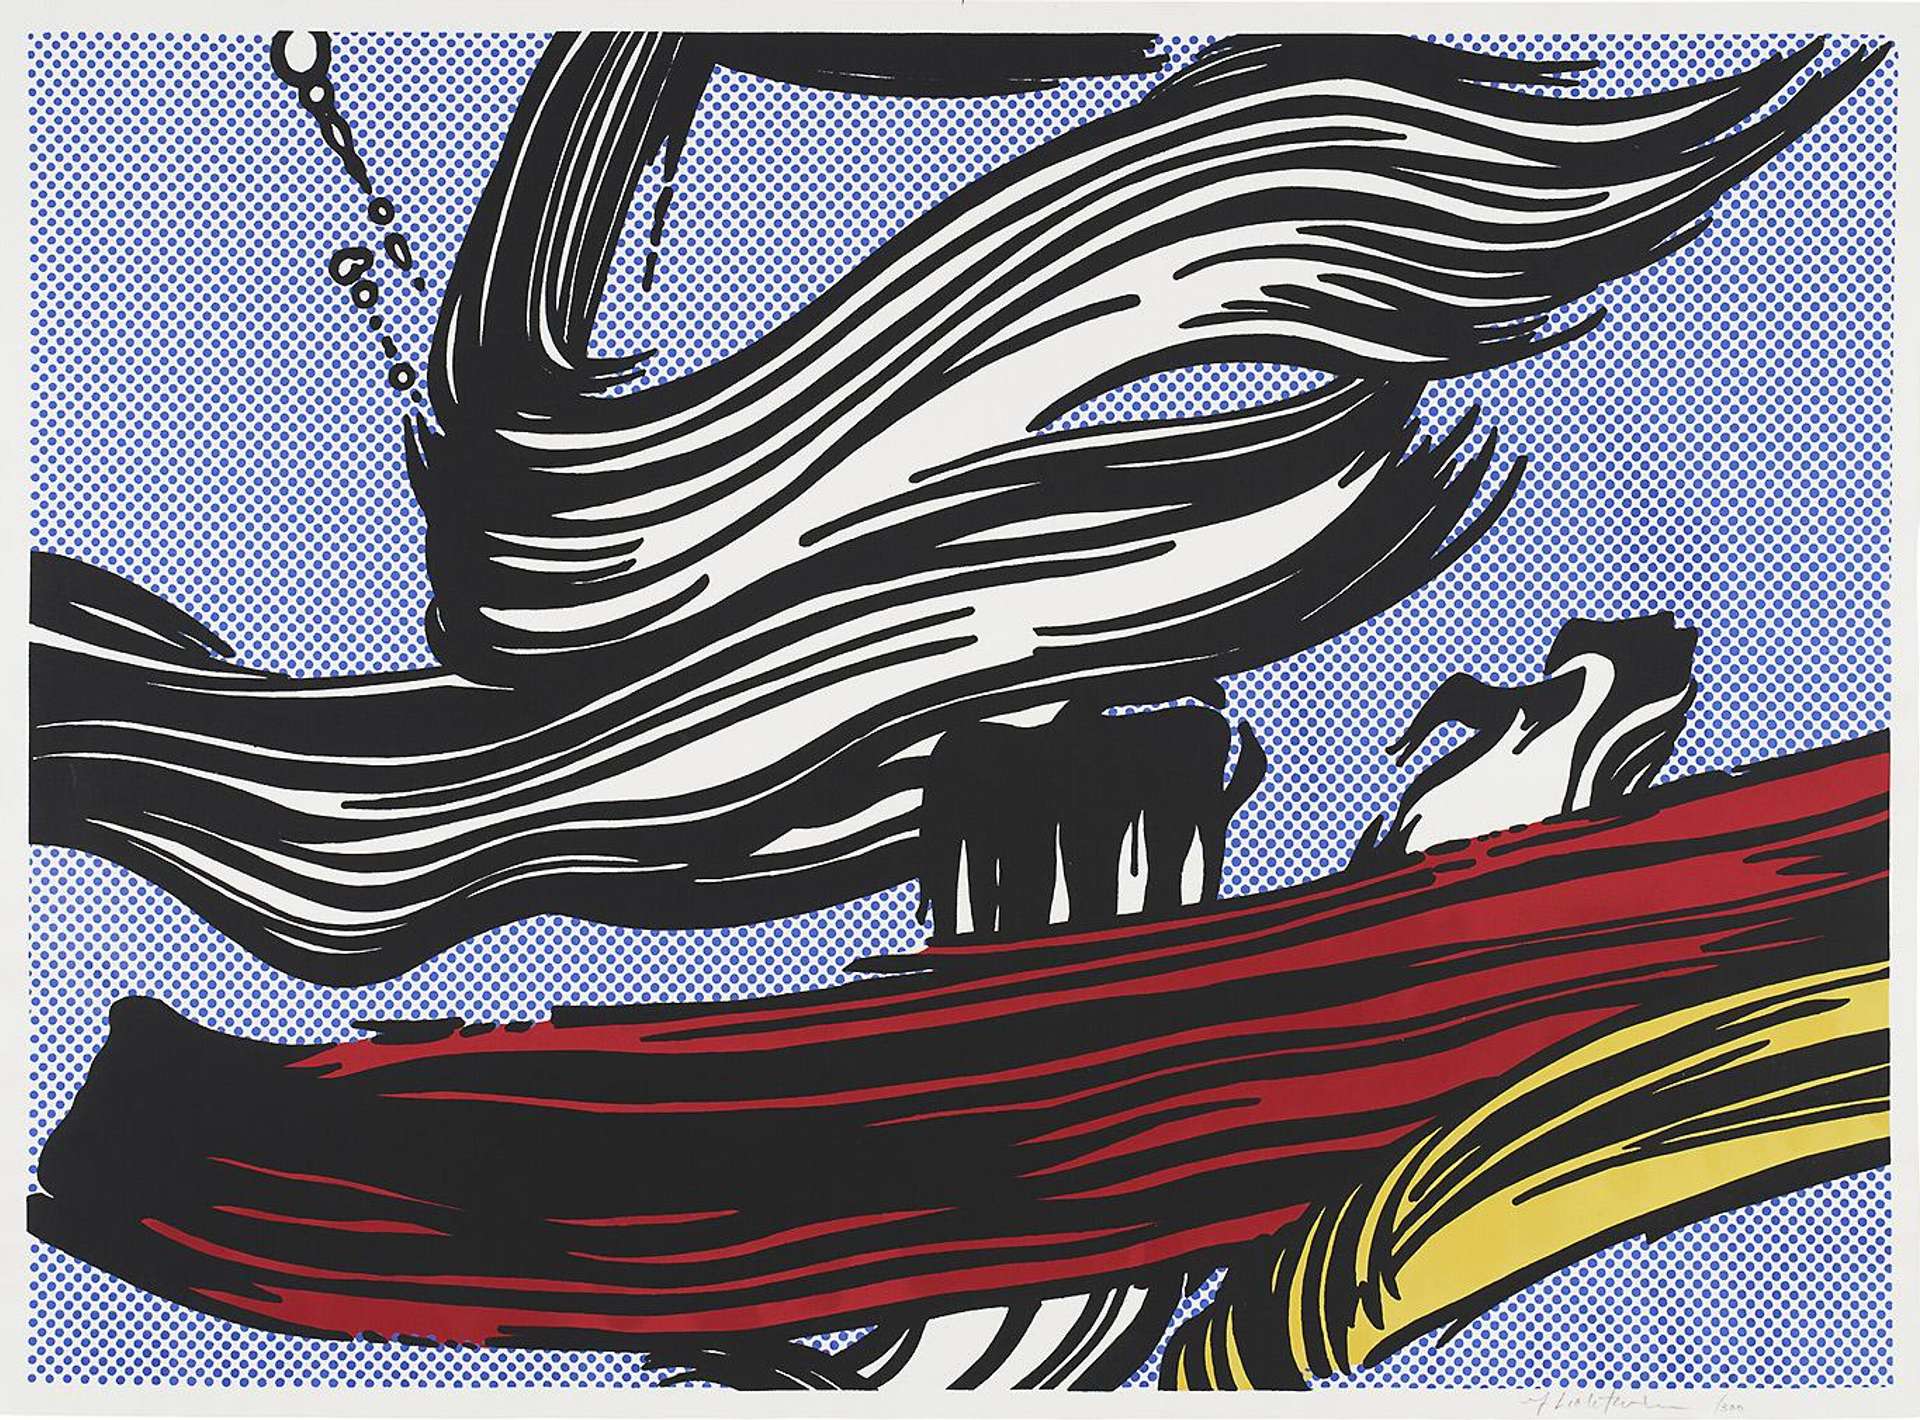 Roy Lichtenstein’s Brushstrokes. A Pop Art screenprint of comic style brushstrokes of red, yellow, and white paint against blue Ben-day dots.